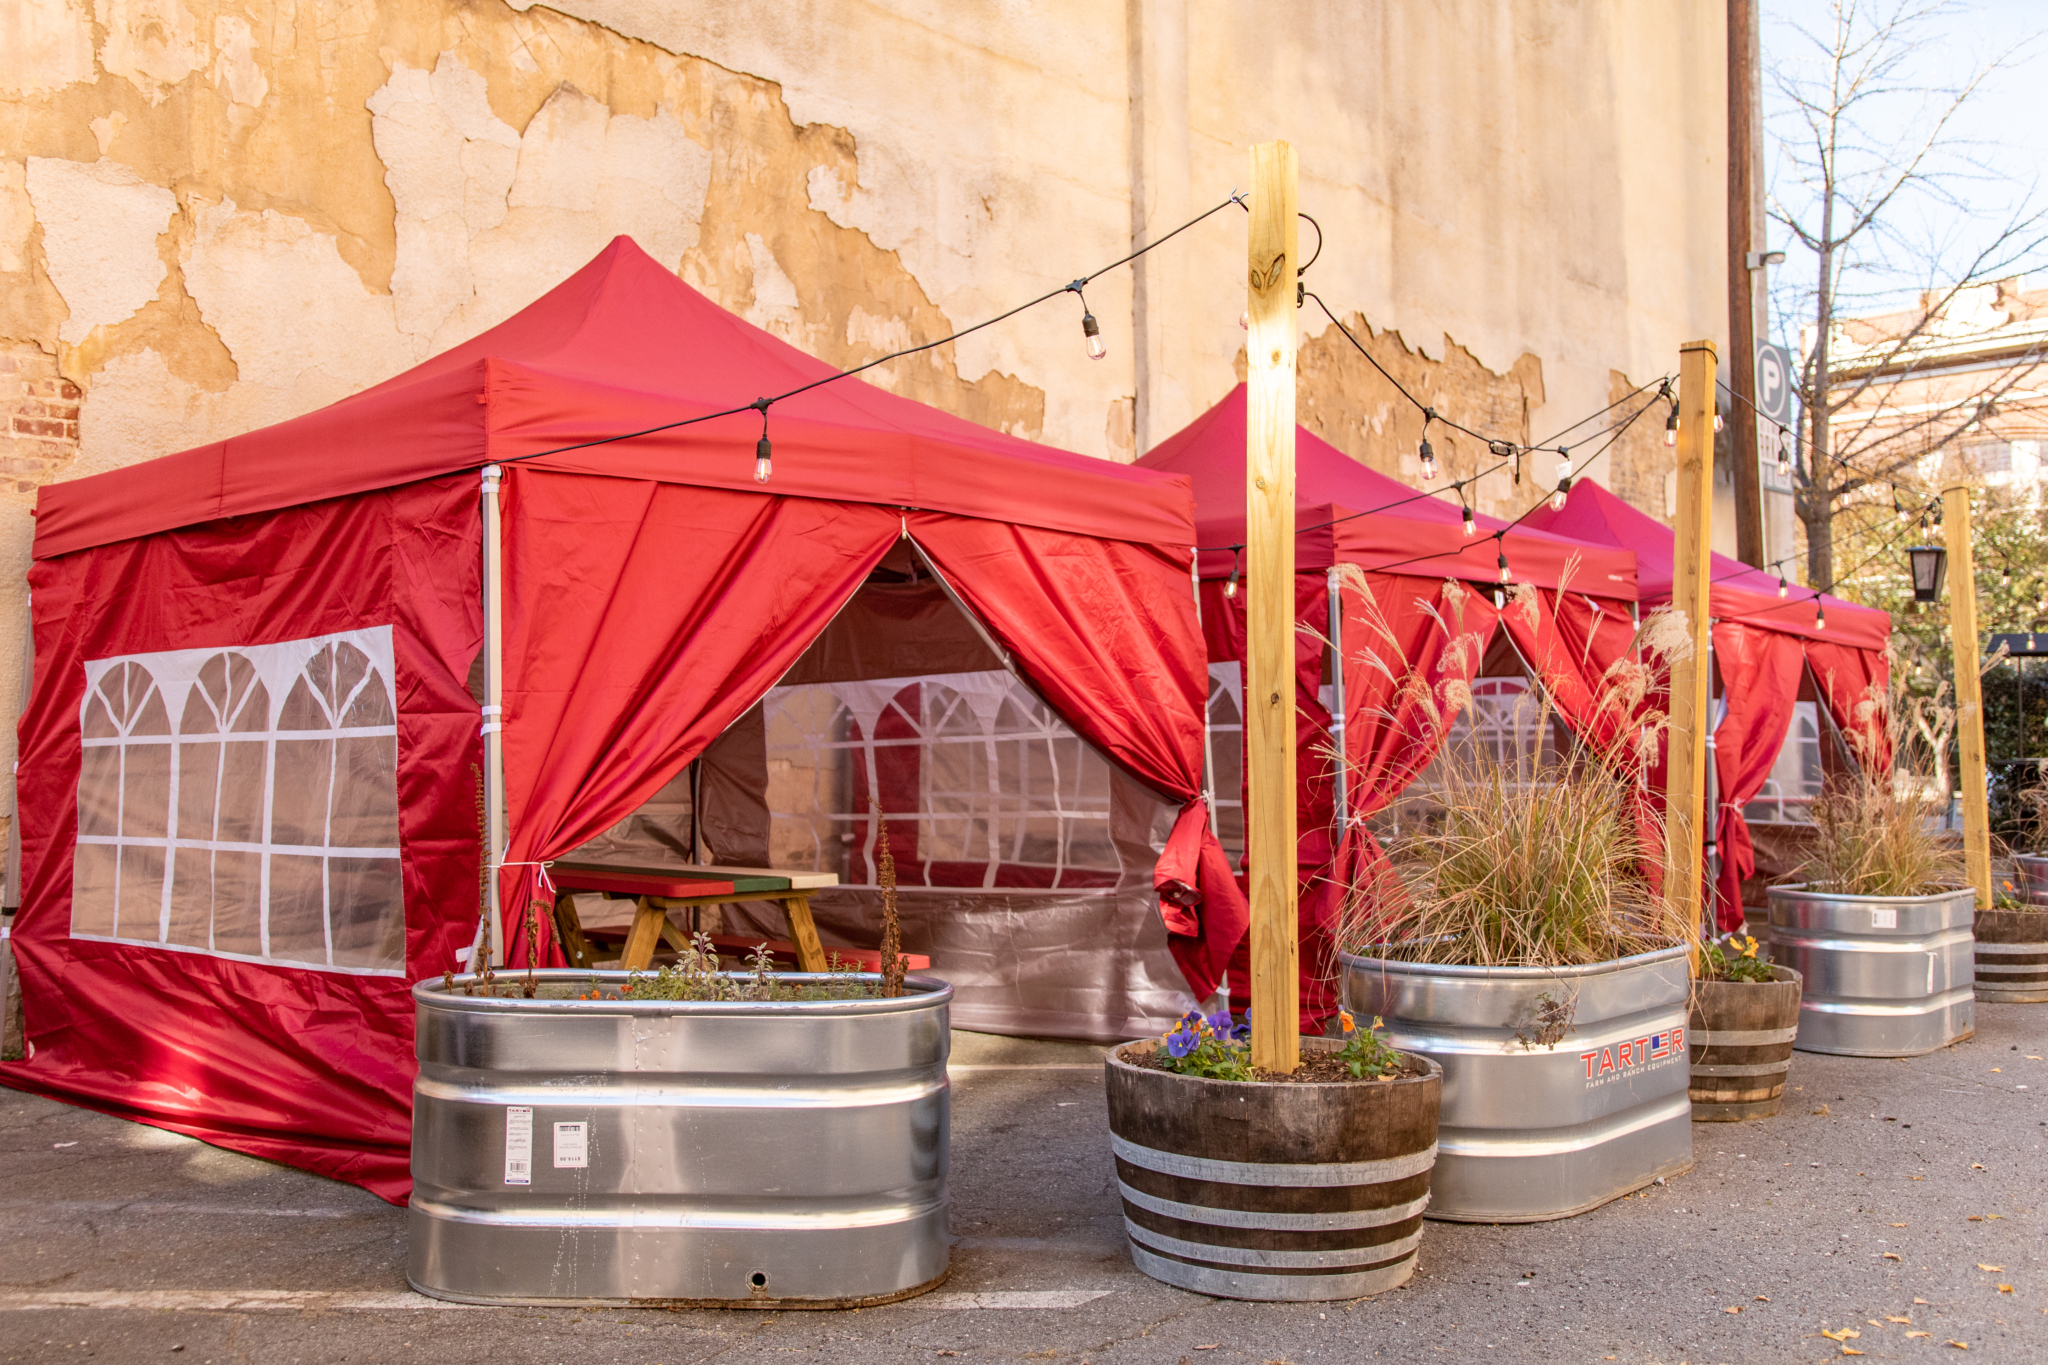 Heated Patios 18 Winter is coming. Checking out local restaurants and bars with heated patios + tents